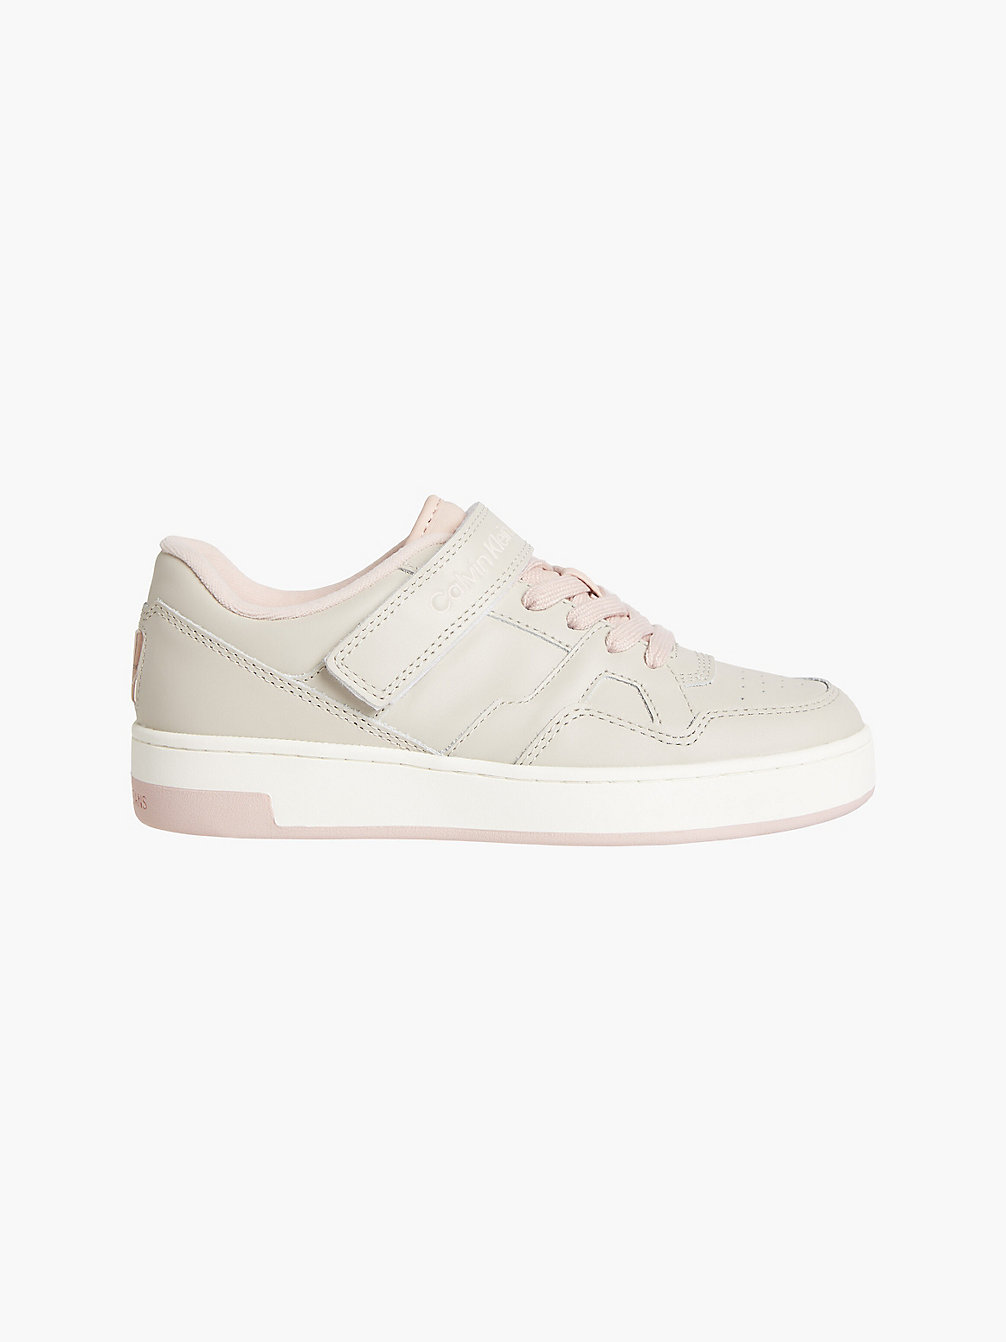 EGGSHELL/PINK BLUSH Leather Trainers undefined women Calvin Klein